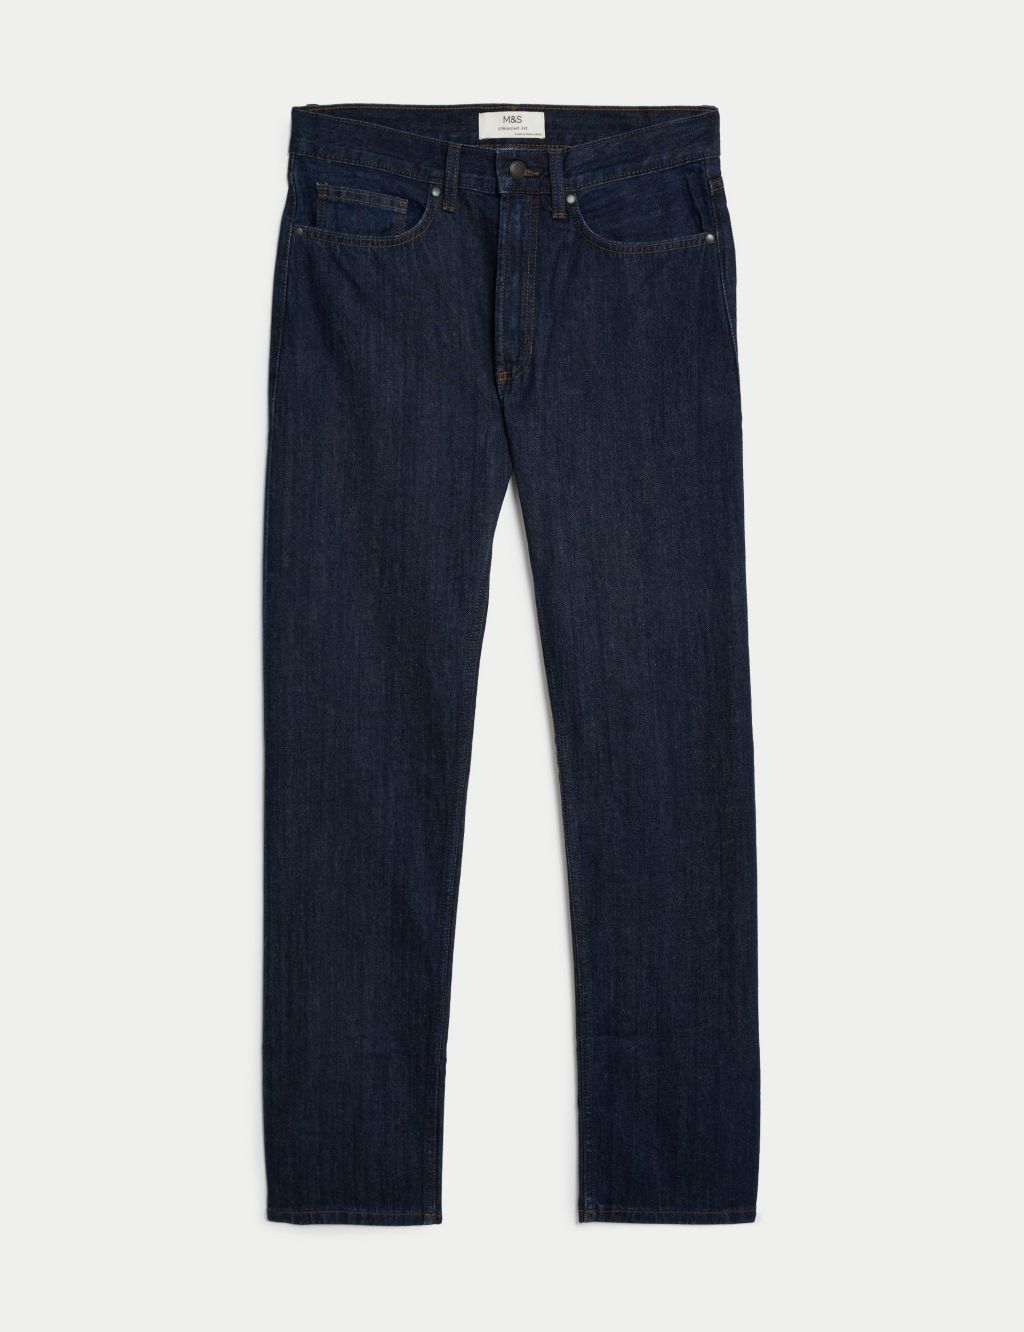 Straight Fit Pure Cotton Jeans image 2